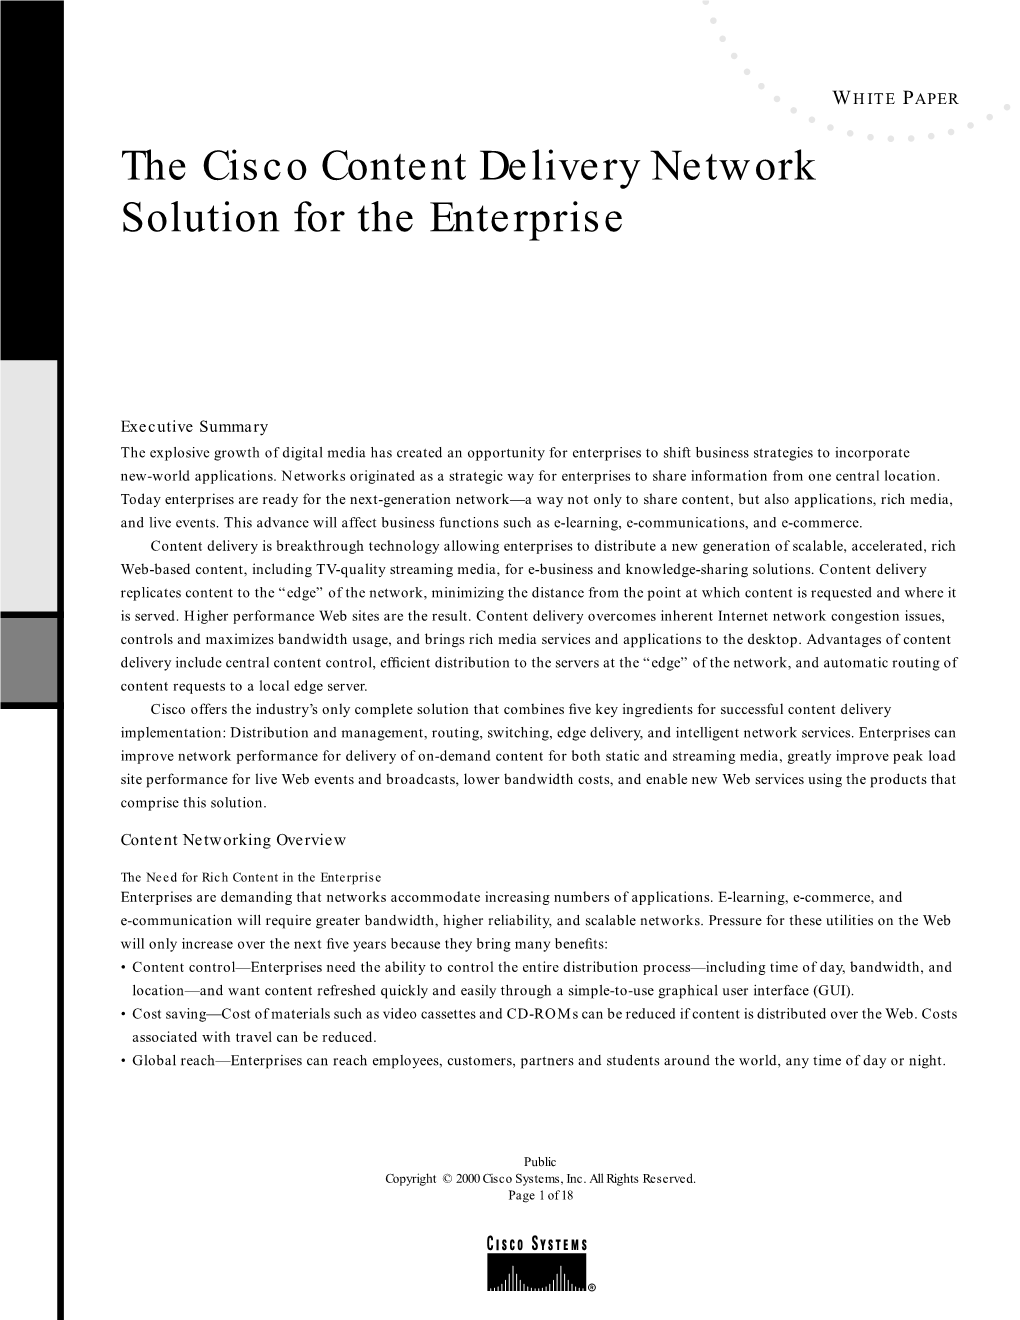 The Cisco Content Delivery Network Solution for the Enterprise